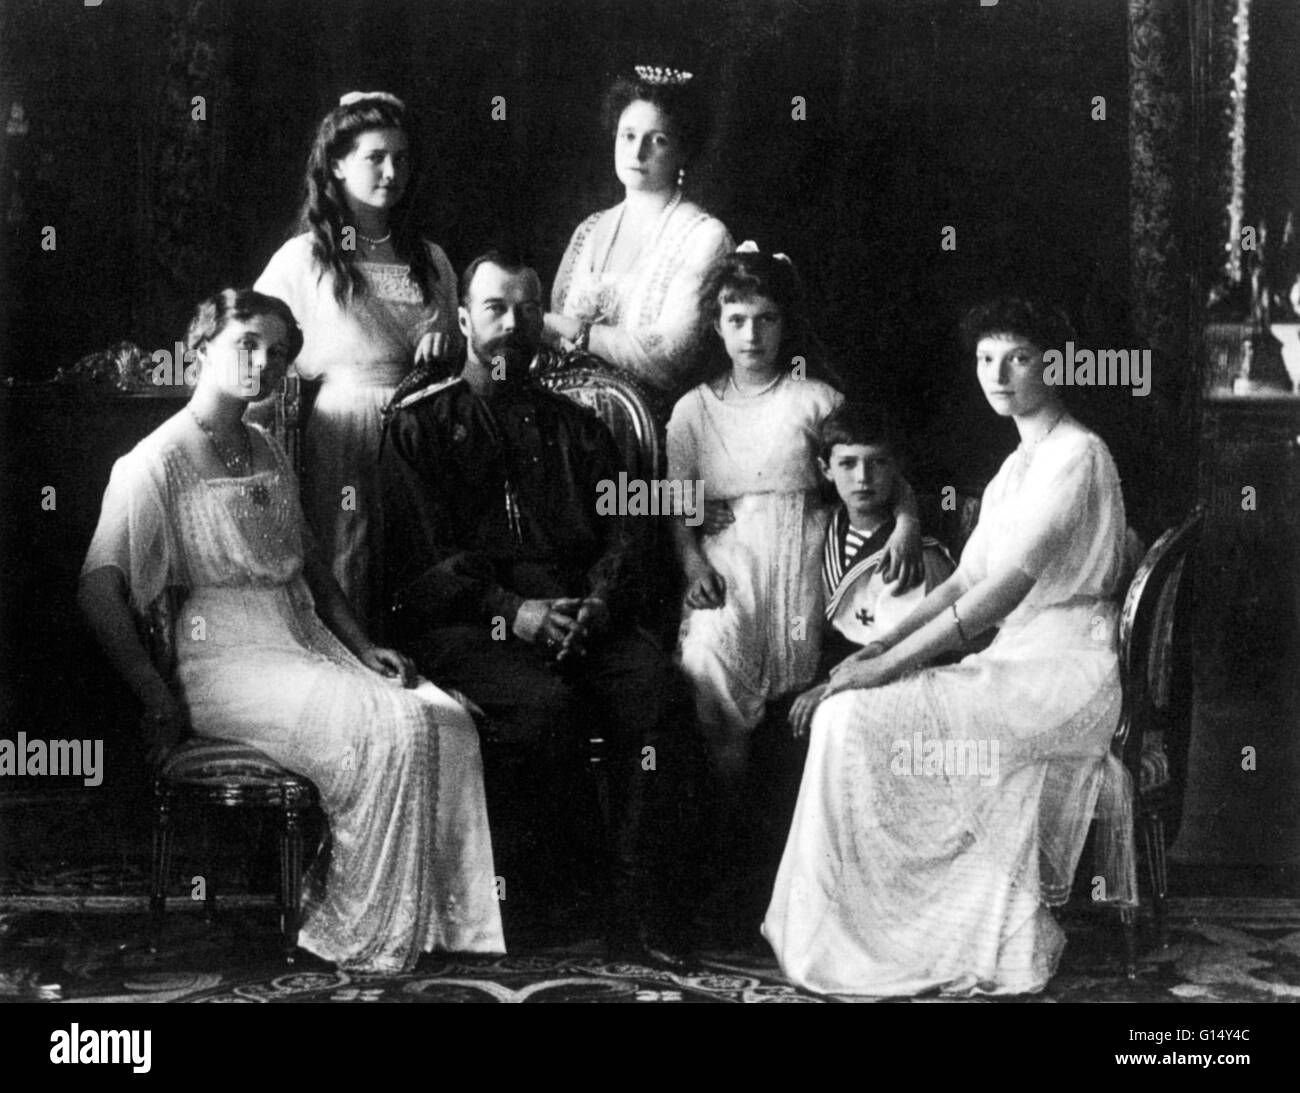 Portrait of Tsar Nicholas II and his family, from the series of pictures taken to mark the Romanov tercentenary in 1913. The pictures were produced by the Imperial family's favorite photographers, Boissonas & Eggler of St. Petersburg and sold as postcards Stock Photo